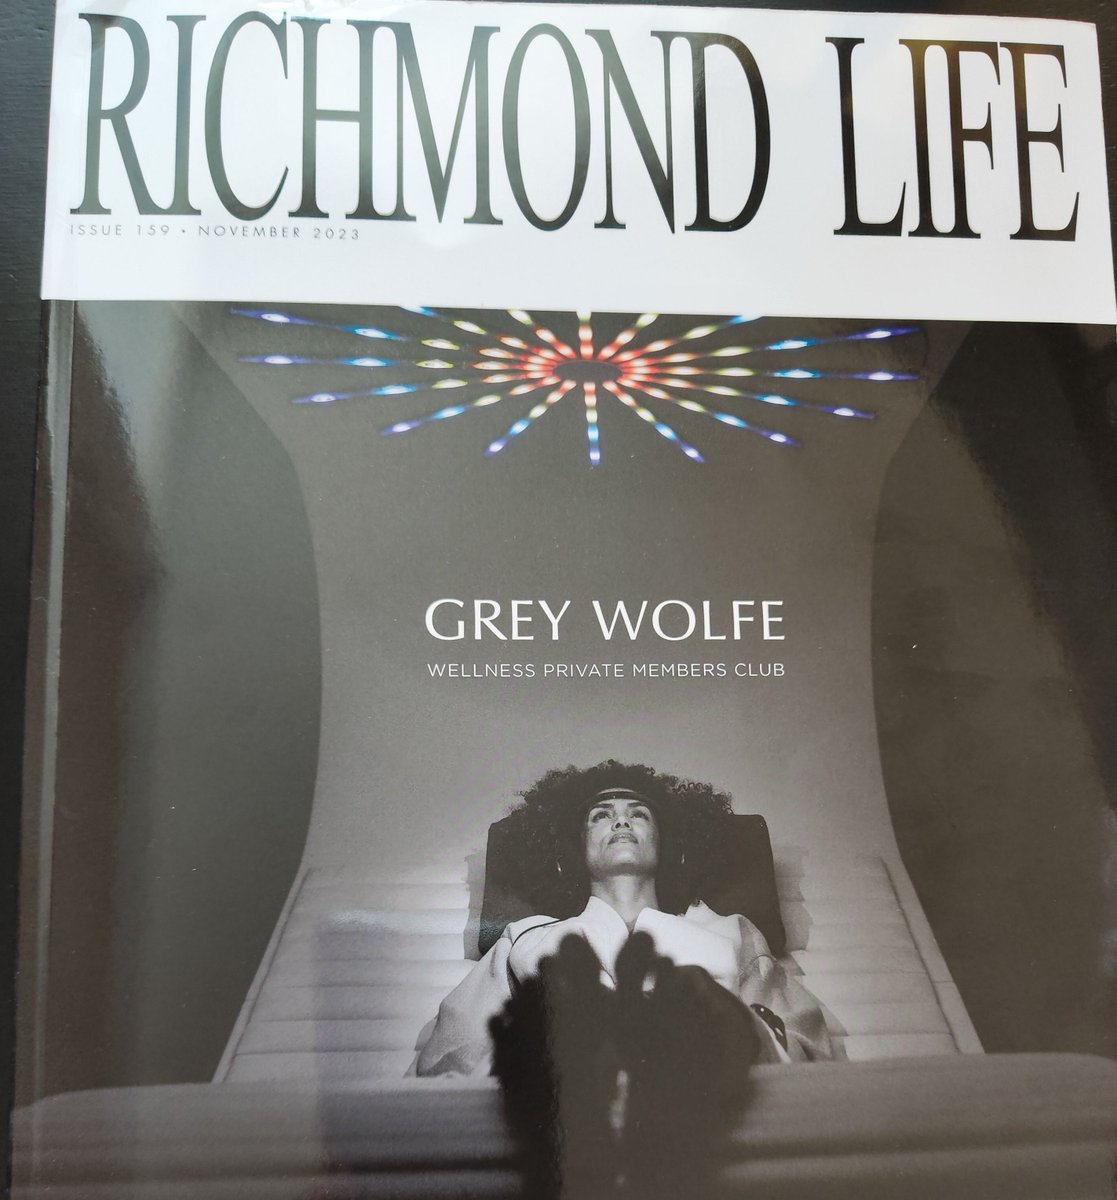 Publication in the Richmond Life Magazine November Issue 2023 about the PAKS Gallery exhibition. #contemporaryart #paksgallery #artists #paintings #sculptures #mixedmediaart #photography #drawings #kunst #kunstgalerie #artauction #artdealer #realestate #interieur #design